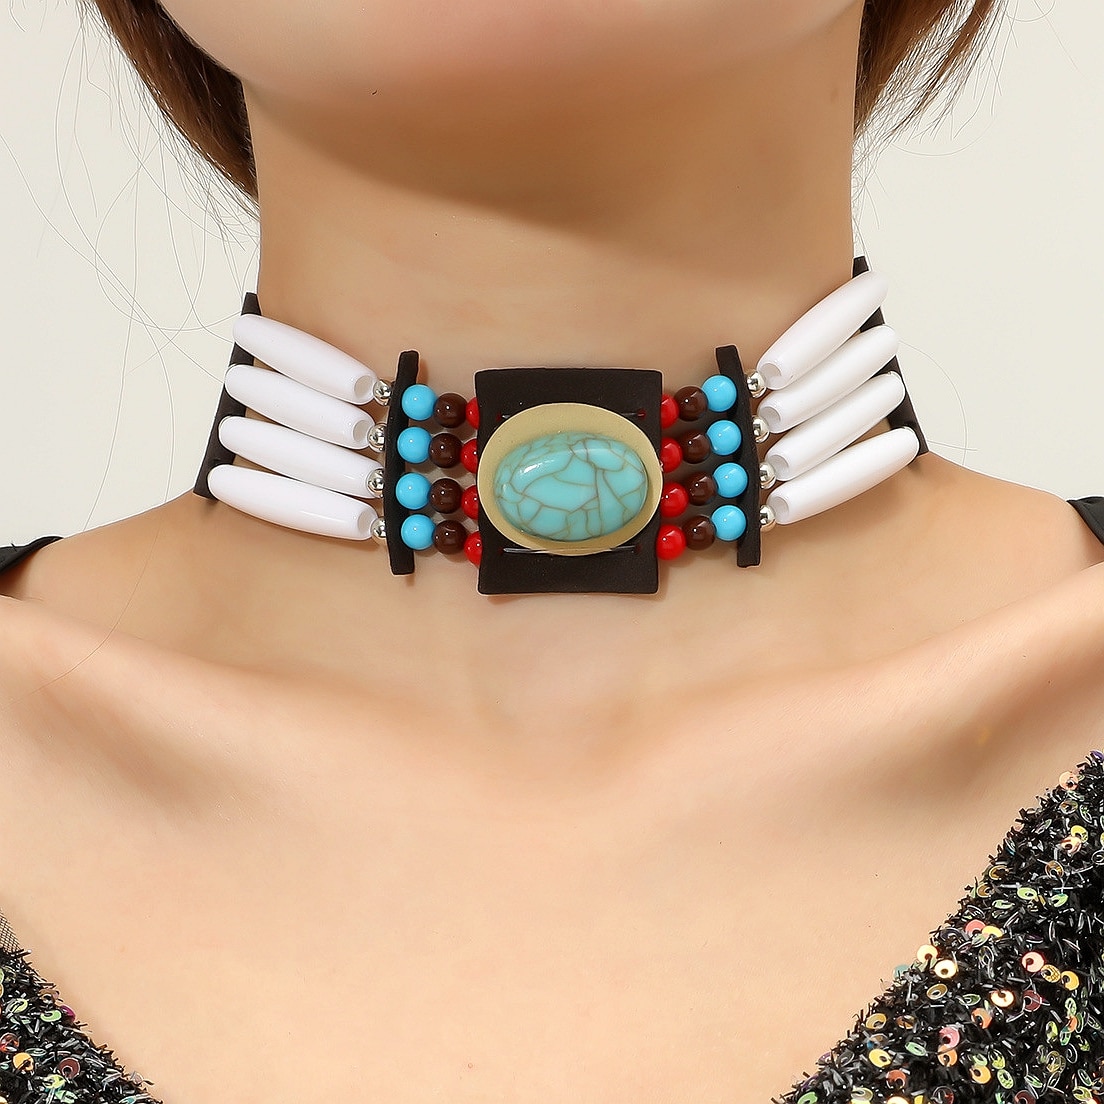 Ethnic-Gypsy-Boho-Necklace-For-Women-Collares-Statement-Jewelry-Turquoises-Indian-Necklaces-Pendants-1005004340796350-2